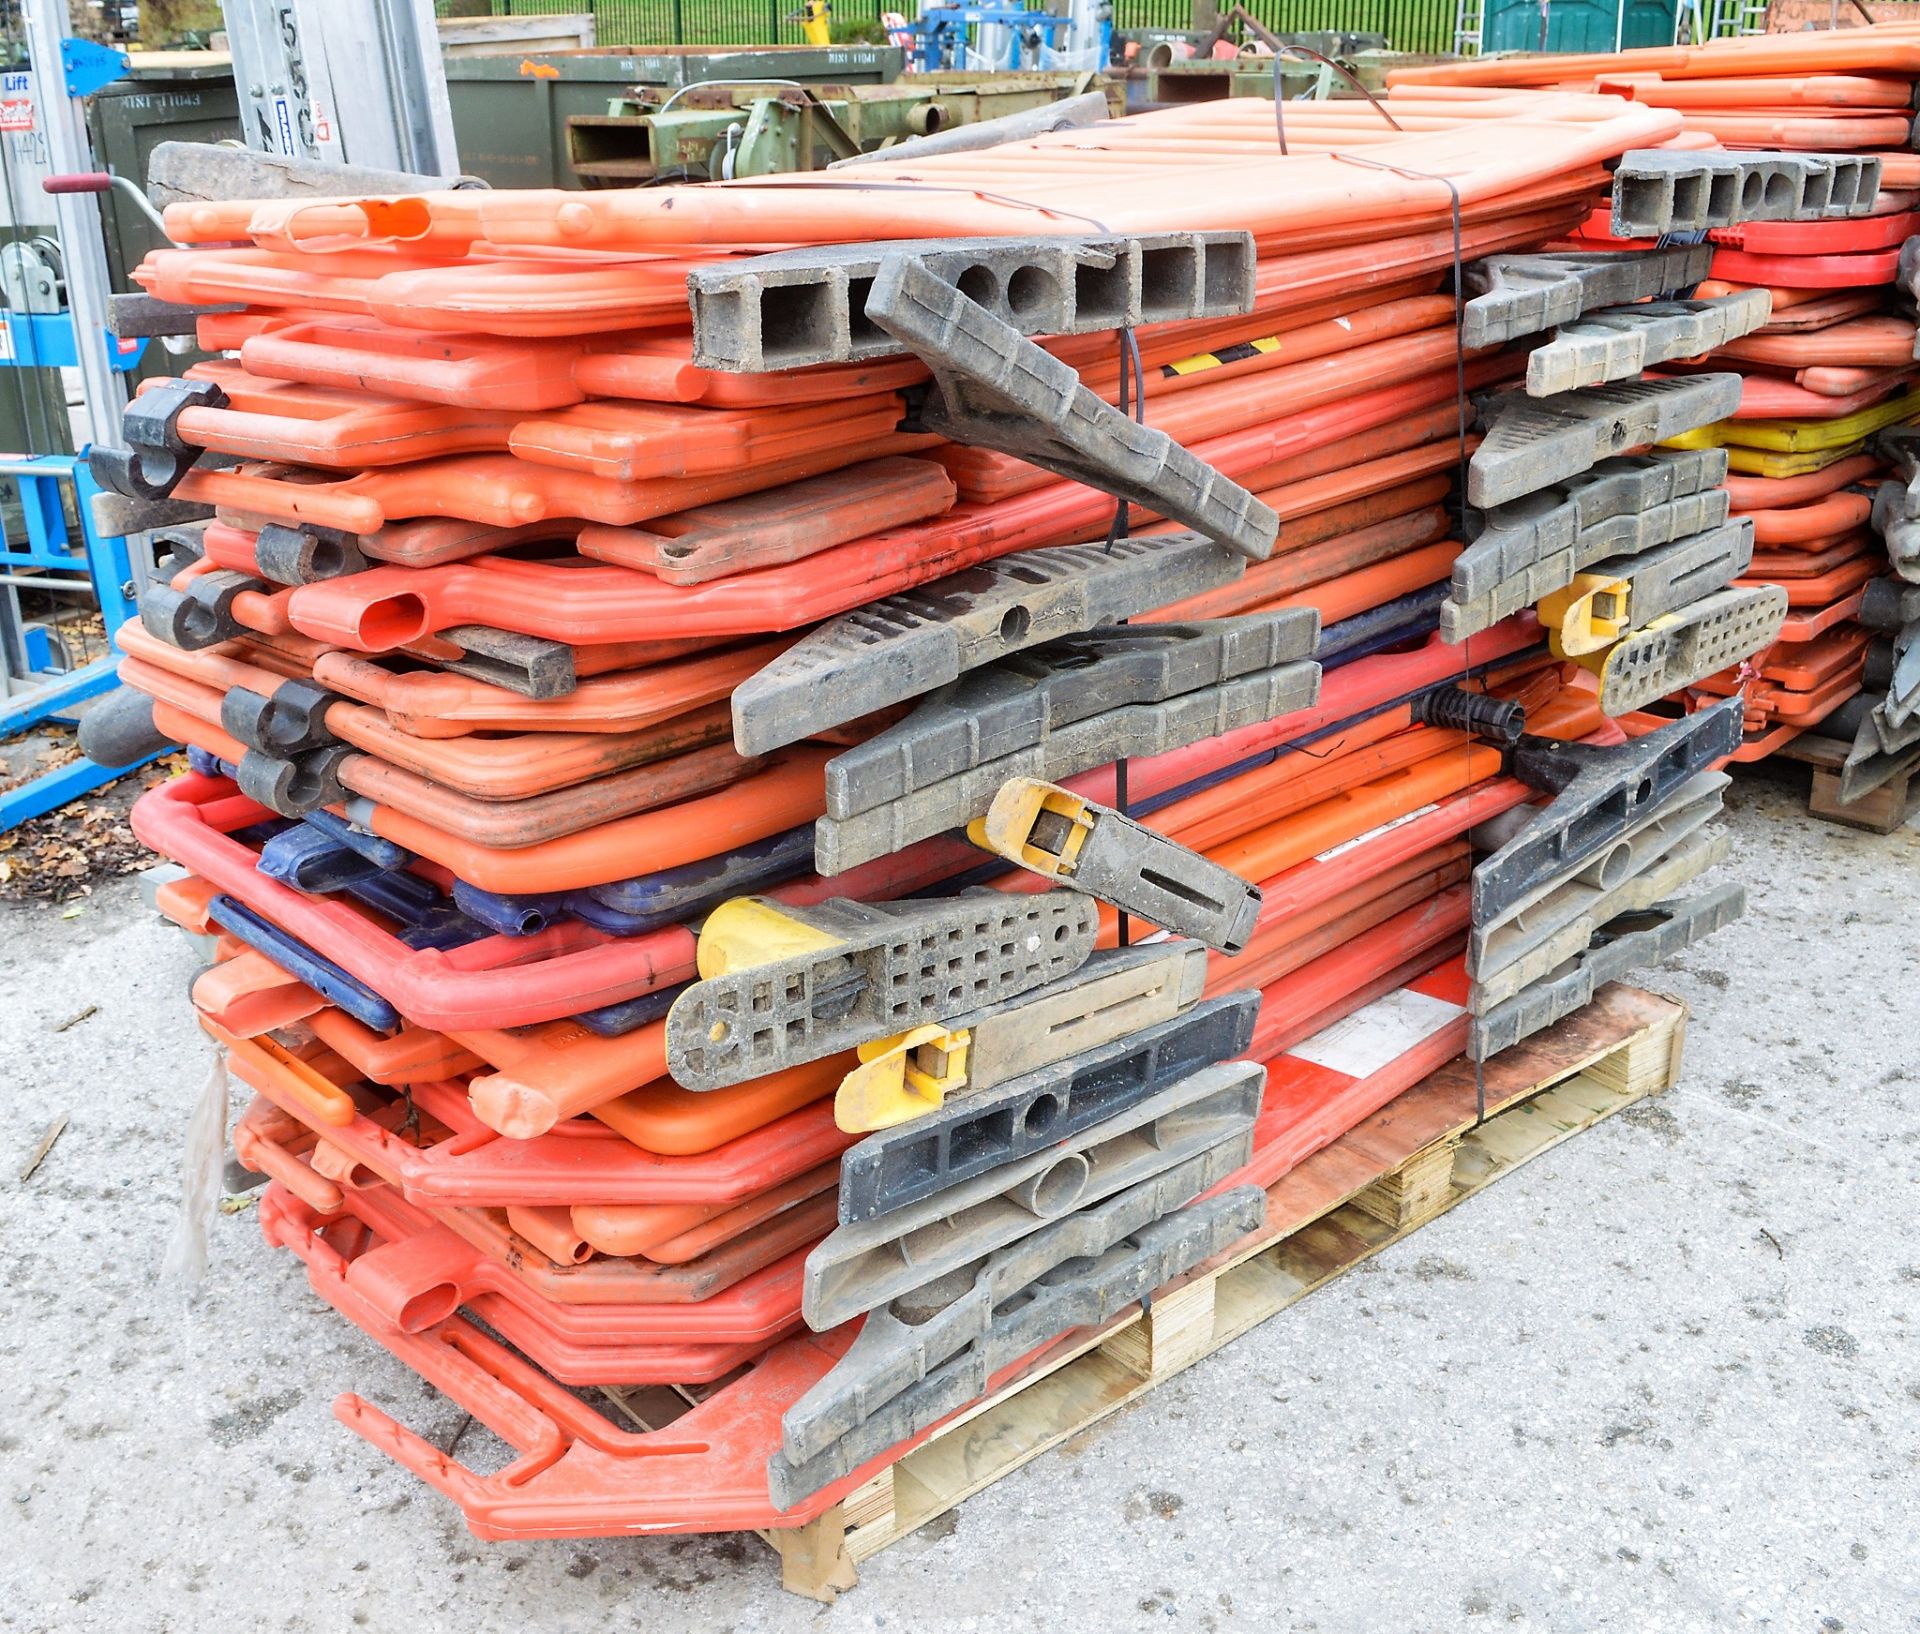 Pallet of plastic safety barriers